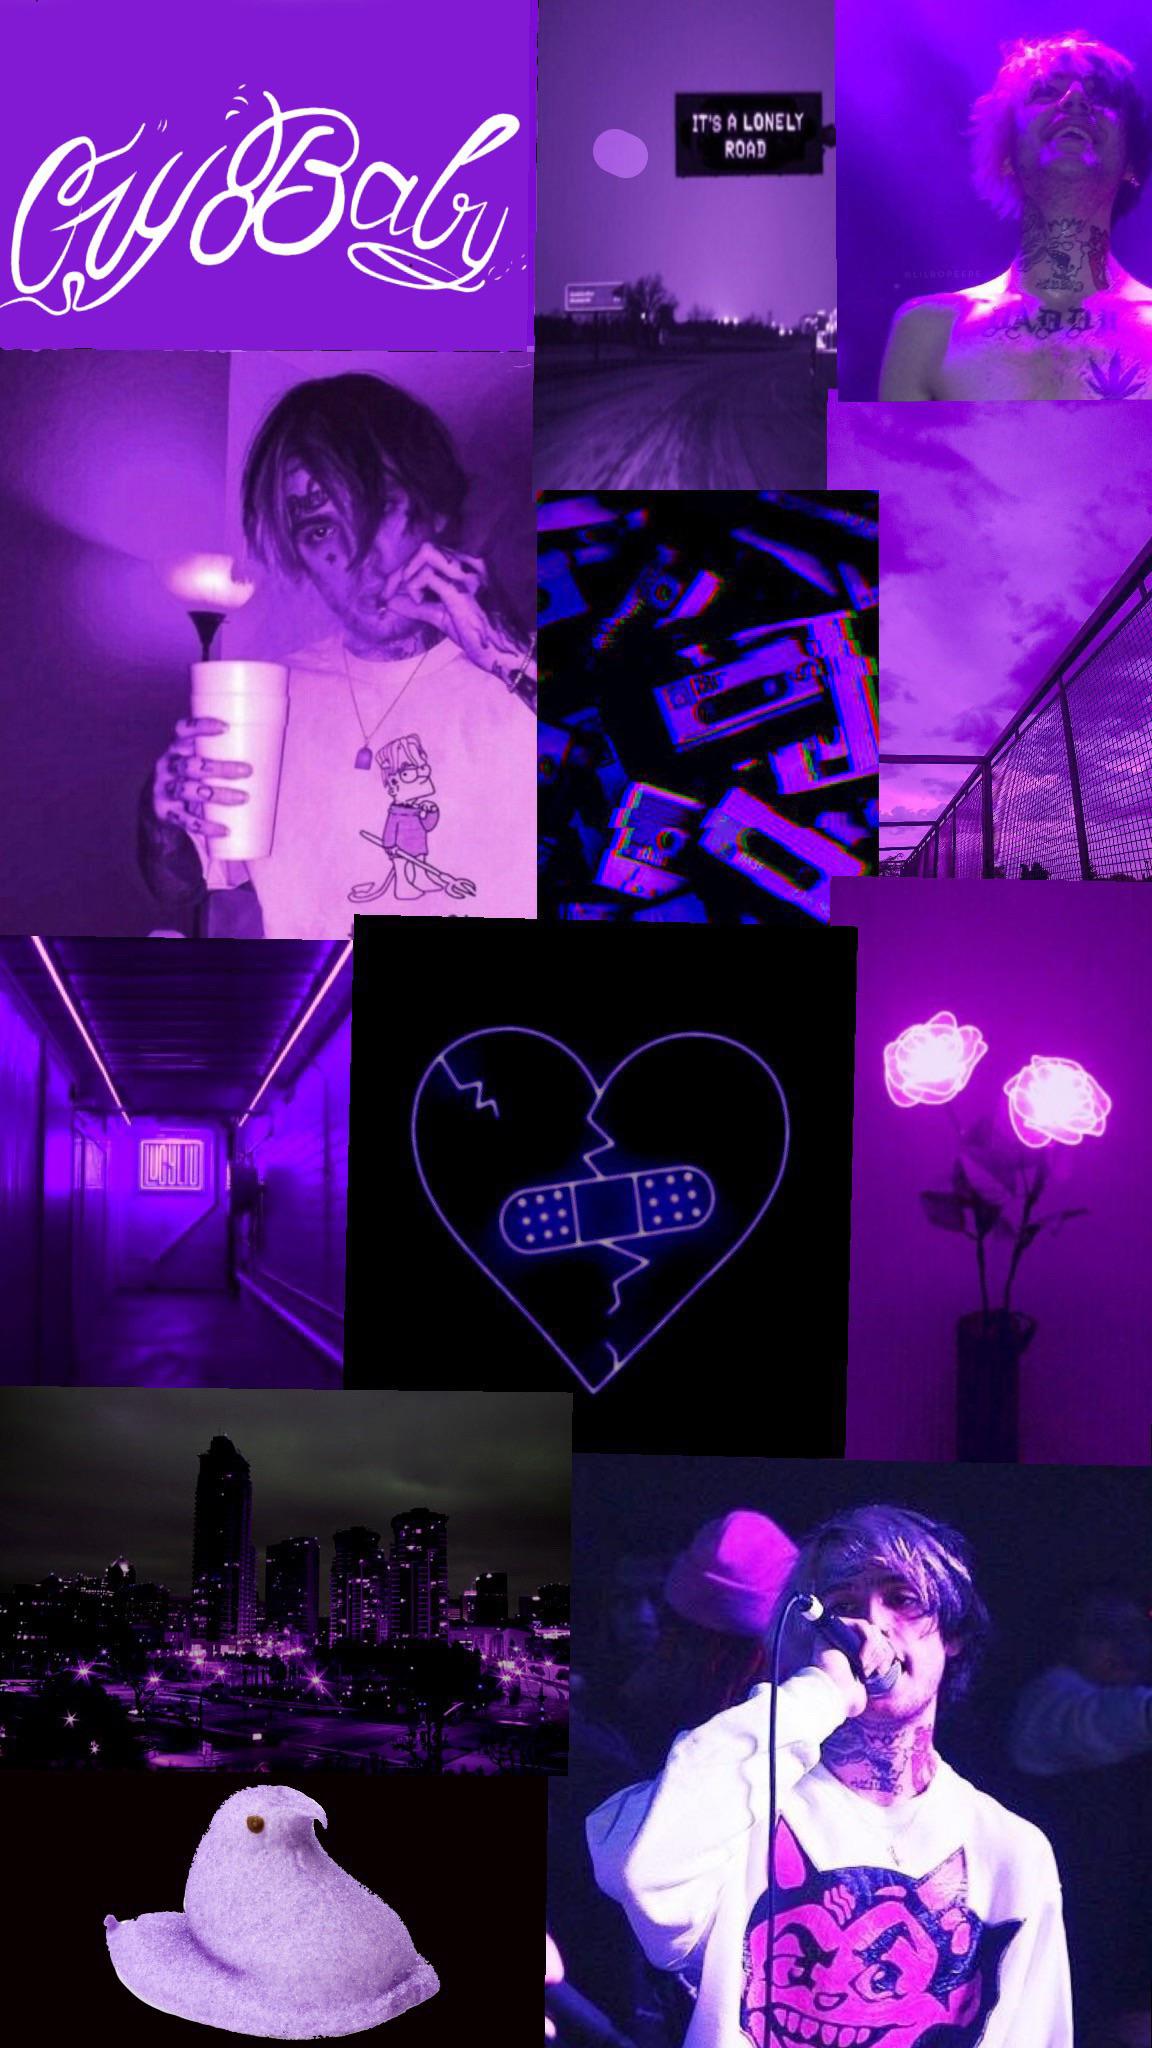 Since the blue did so well yesterday here is the Lil peep purple aesthetic background. Thank you guys so much